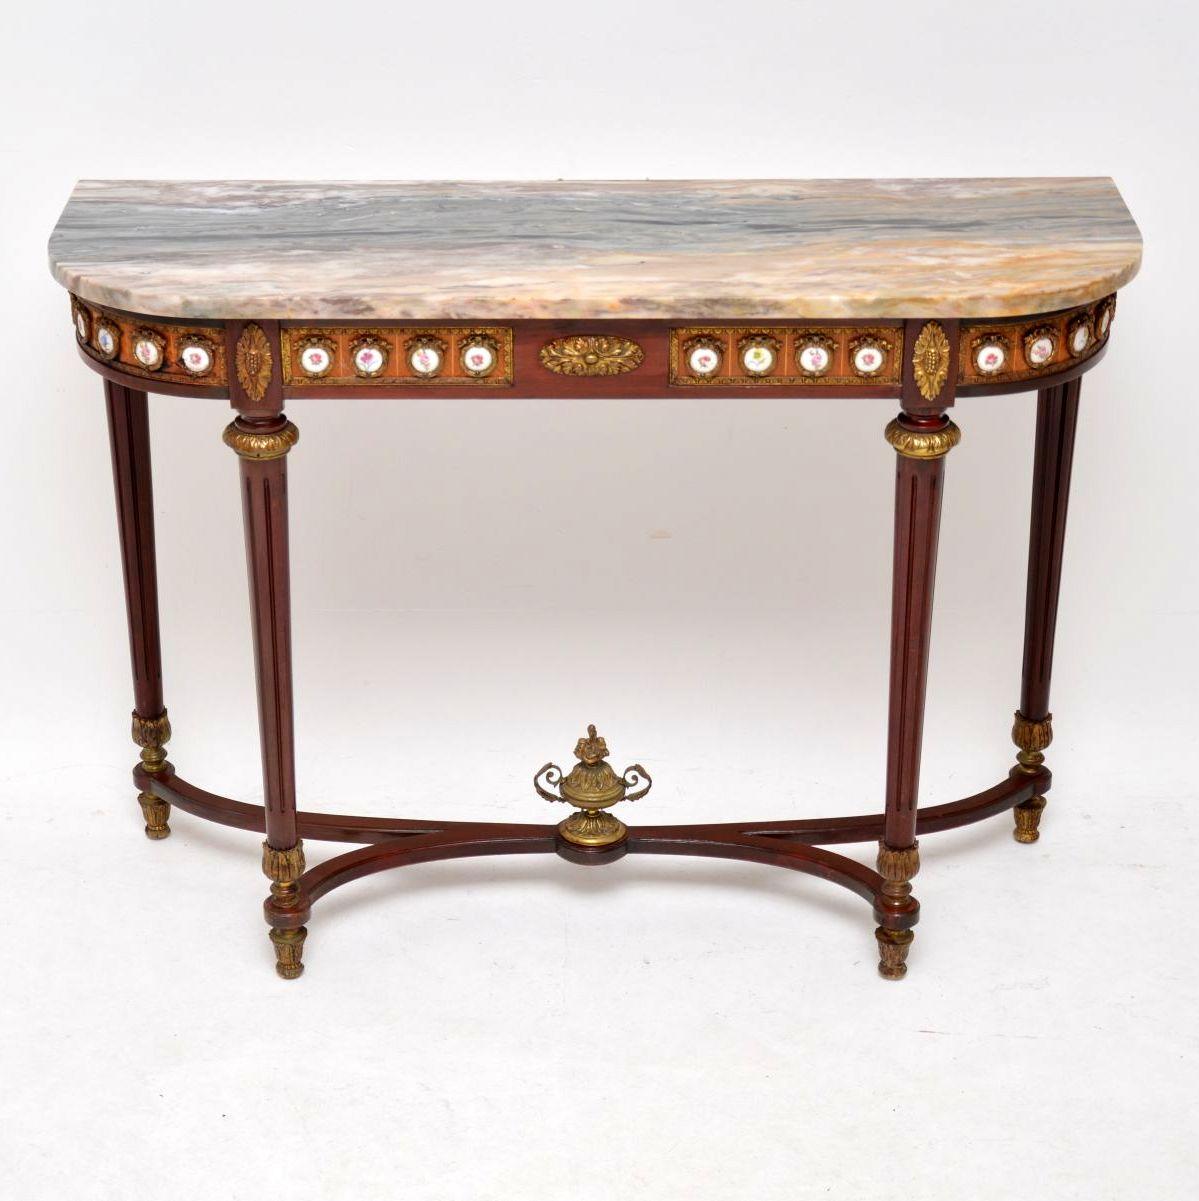 Fine quality antique French marble top mahogany console side table in excellent original condition, with well-cast gilt bronze mounts and feet. There’s also a beautiful gilt bronze urn sitting on the middle of the cross stretchers between the legs.